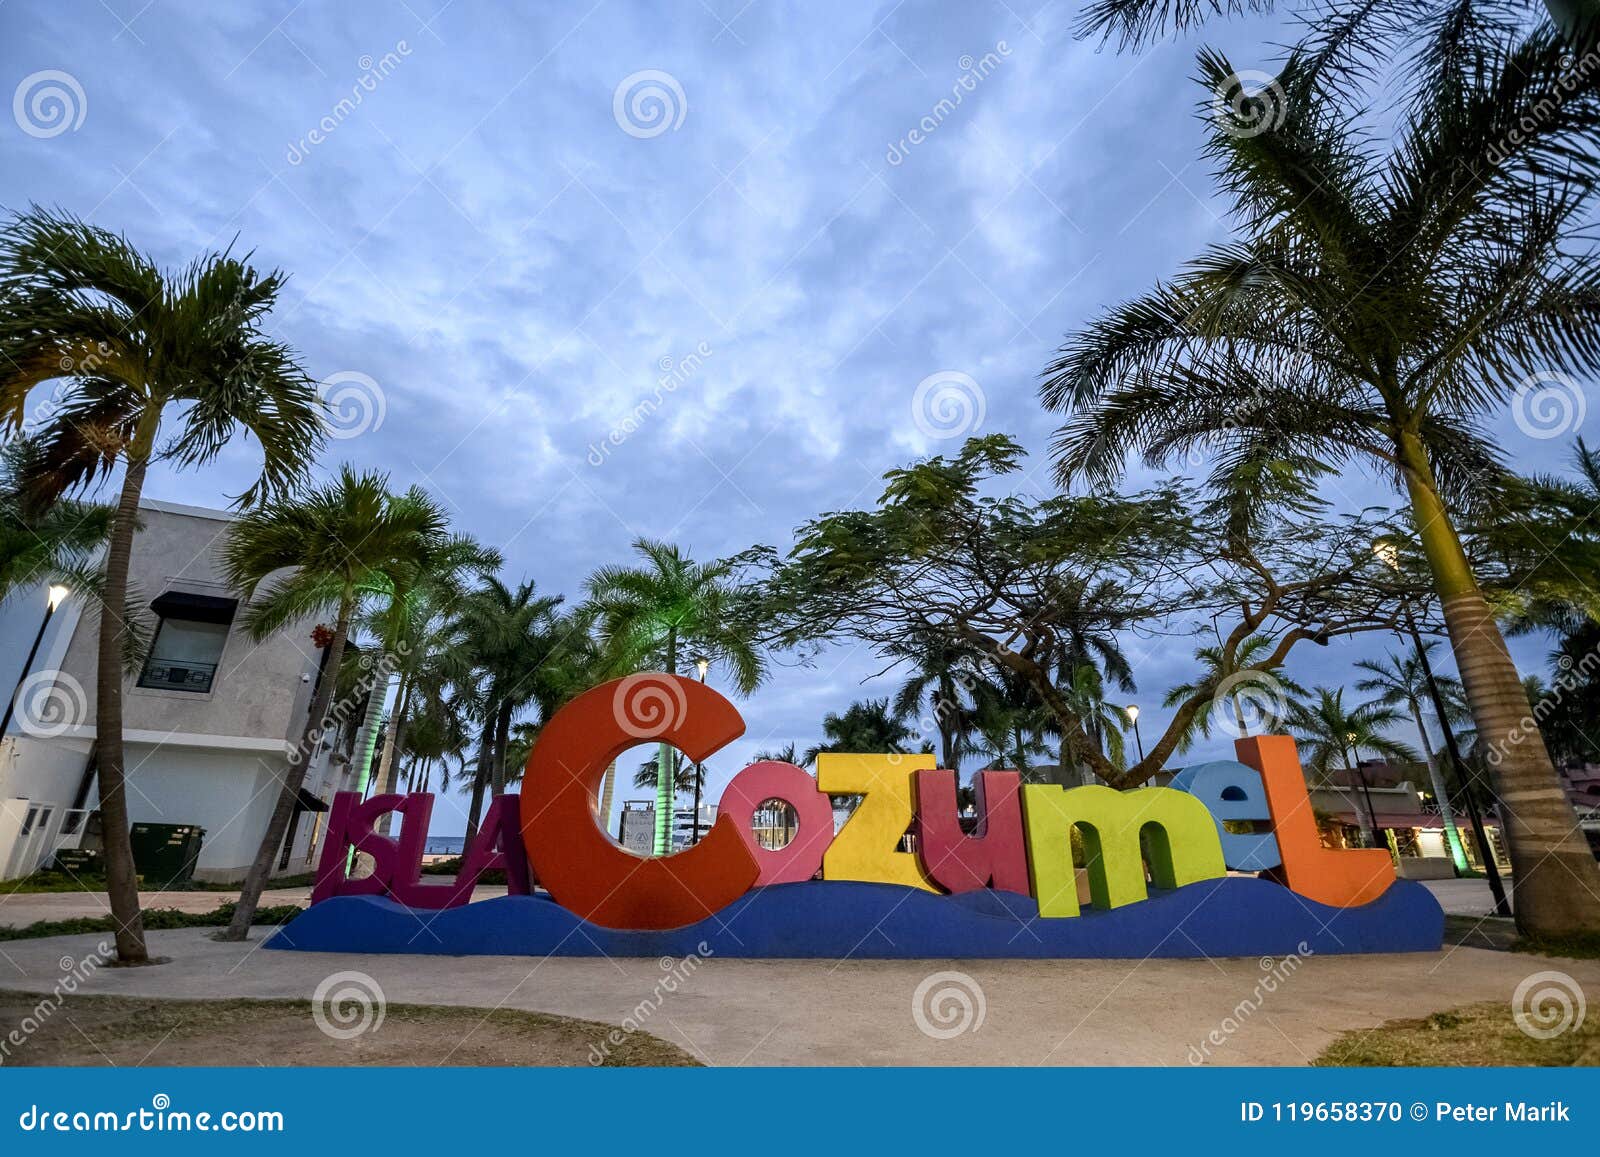 the cozumel selfie sign at dusk on the main square of the island